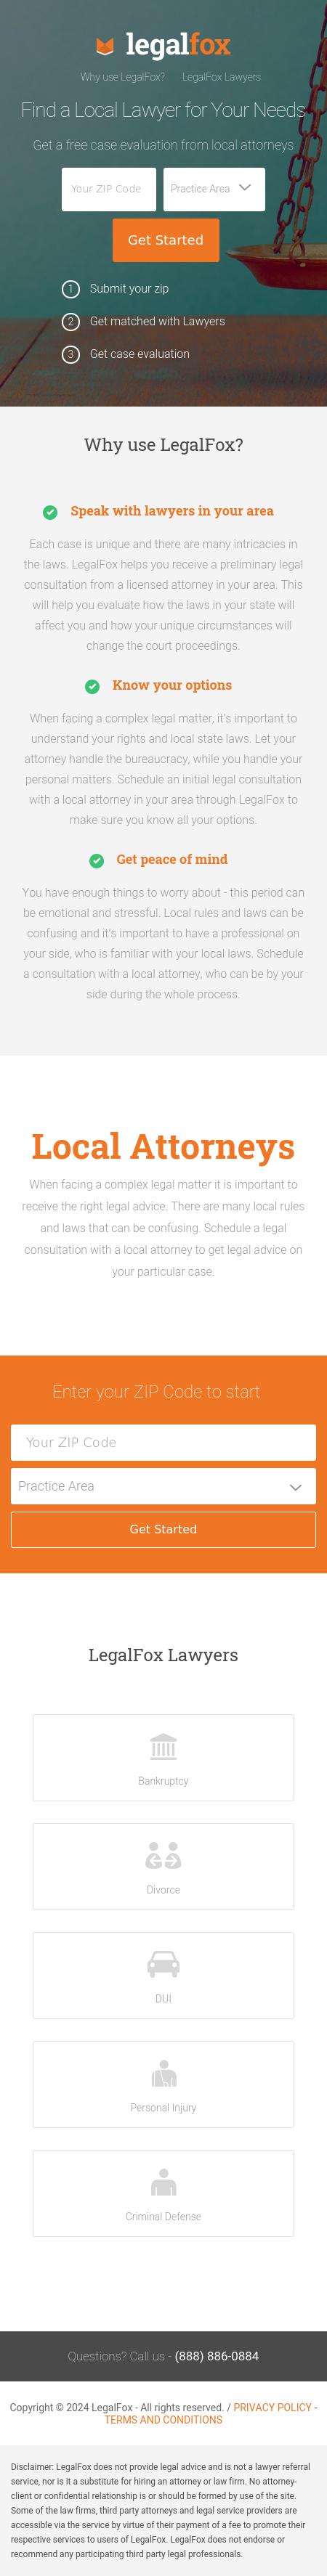 Find a Local Attorney - Newport News VA Lawyers